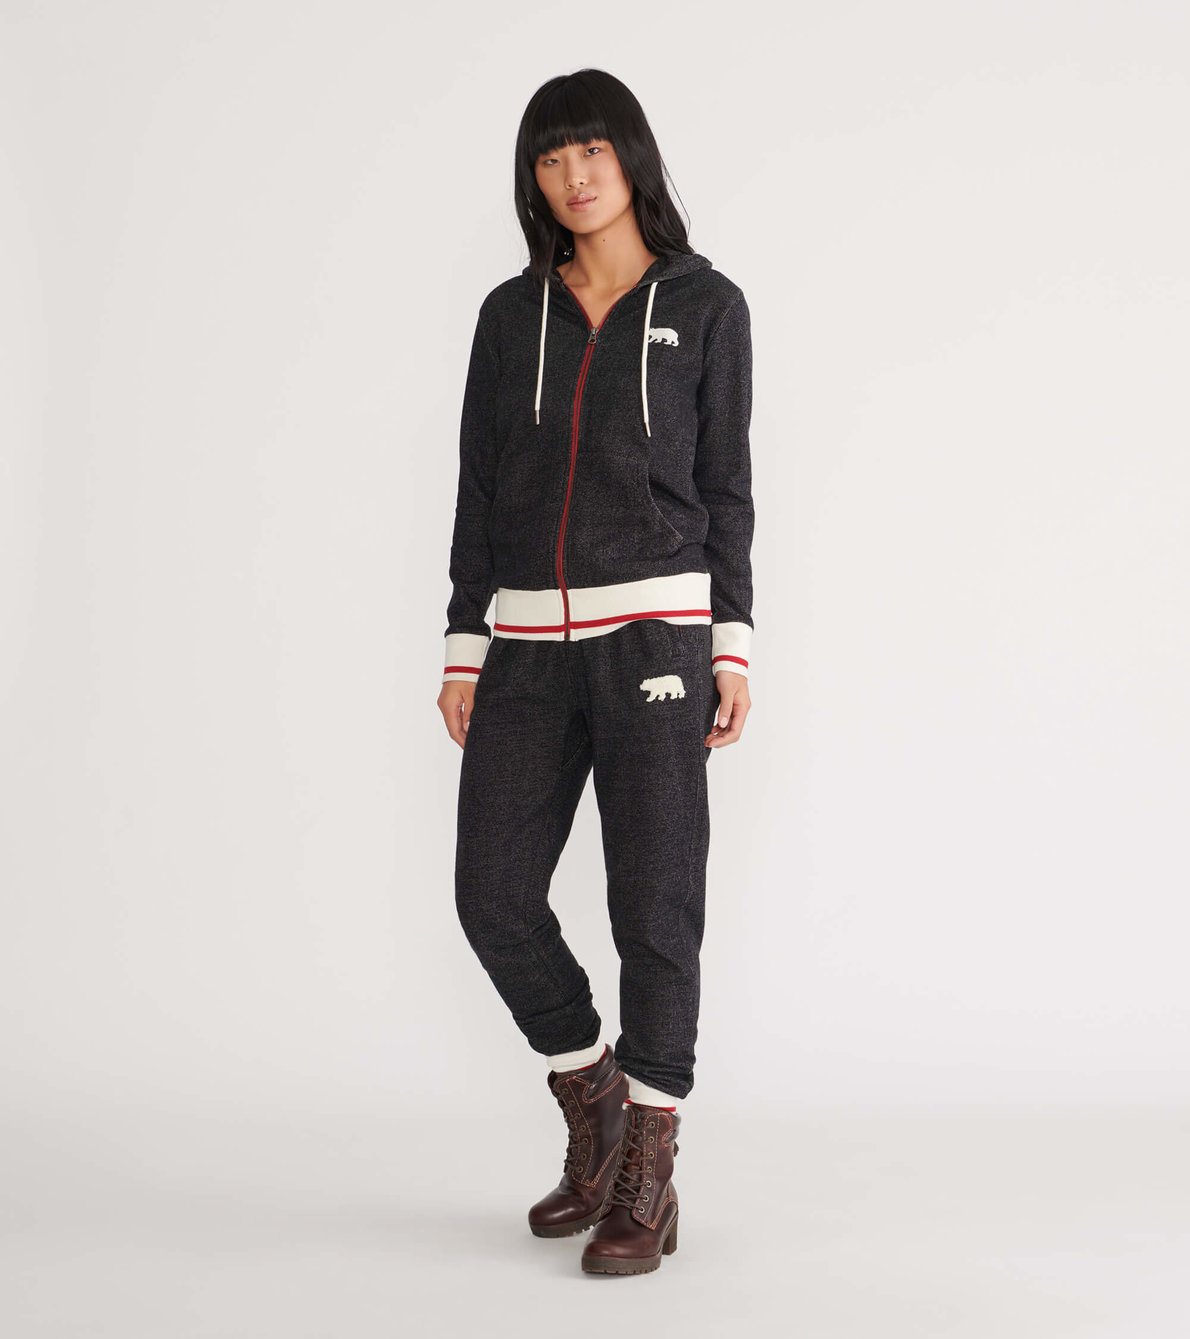 View larger image of Charcoal Bear Women's Heritage Separates with Full Zip Hoodie